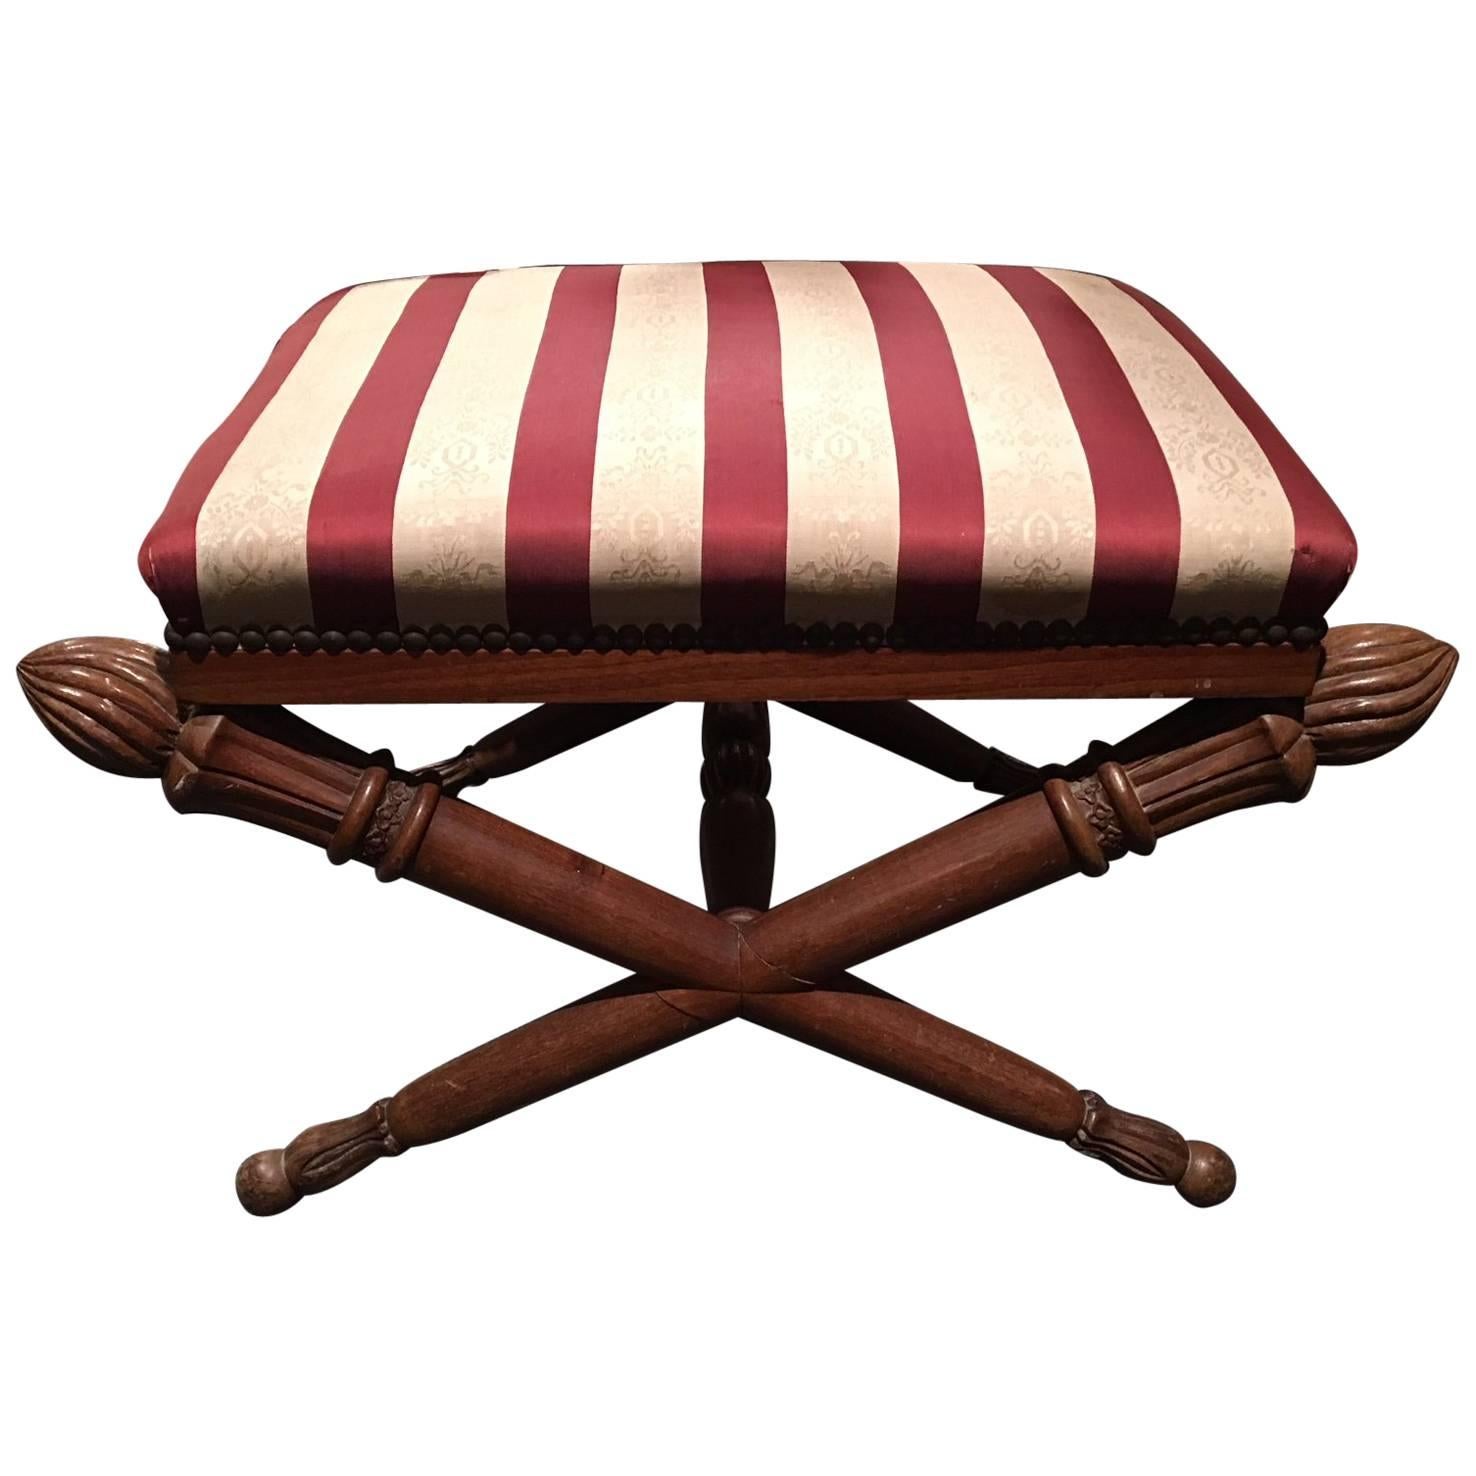 French Louis XVI Style Upholstered Stool with Torchiere Finials, 19th Century